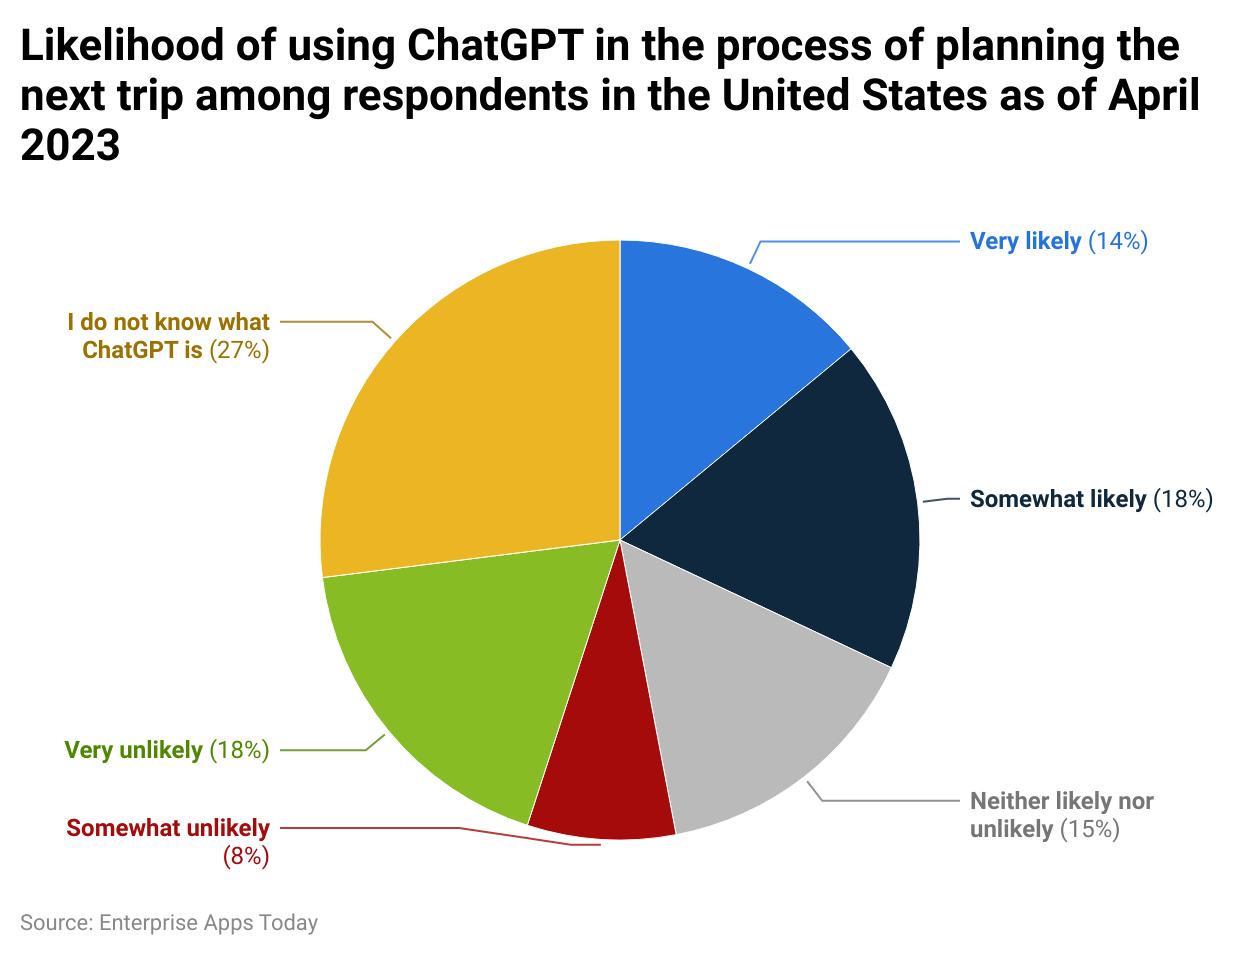 likelihood-of-using-chatgpt-in-the-process-of-planning-the-next-trip-among-respondents-in-the-united-states-as-of-april-2023